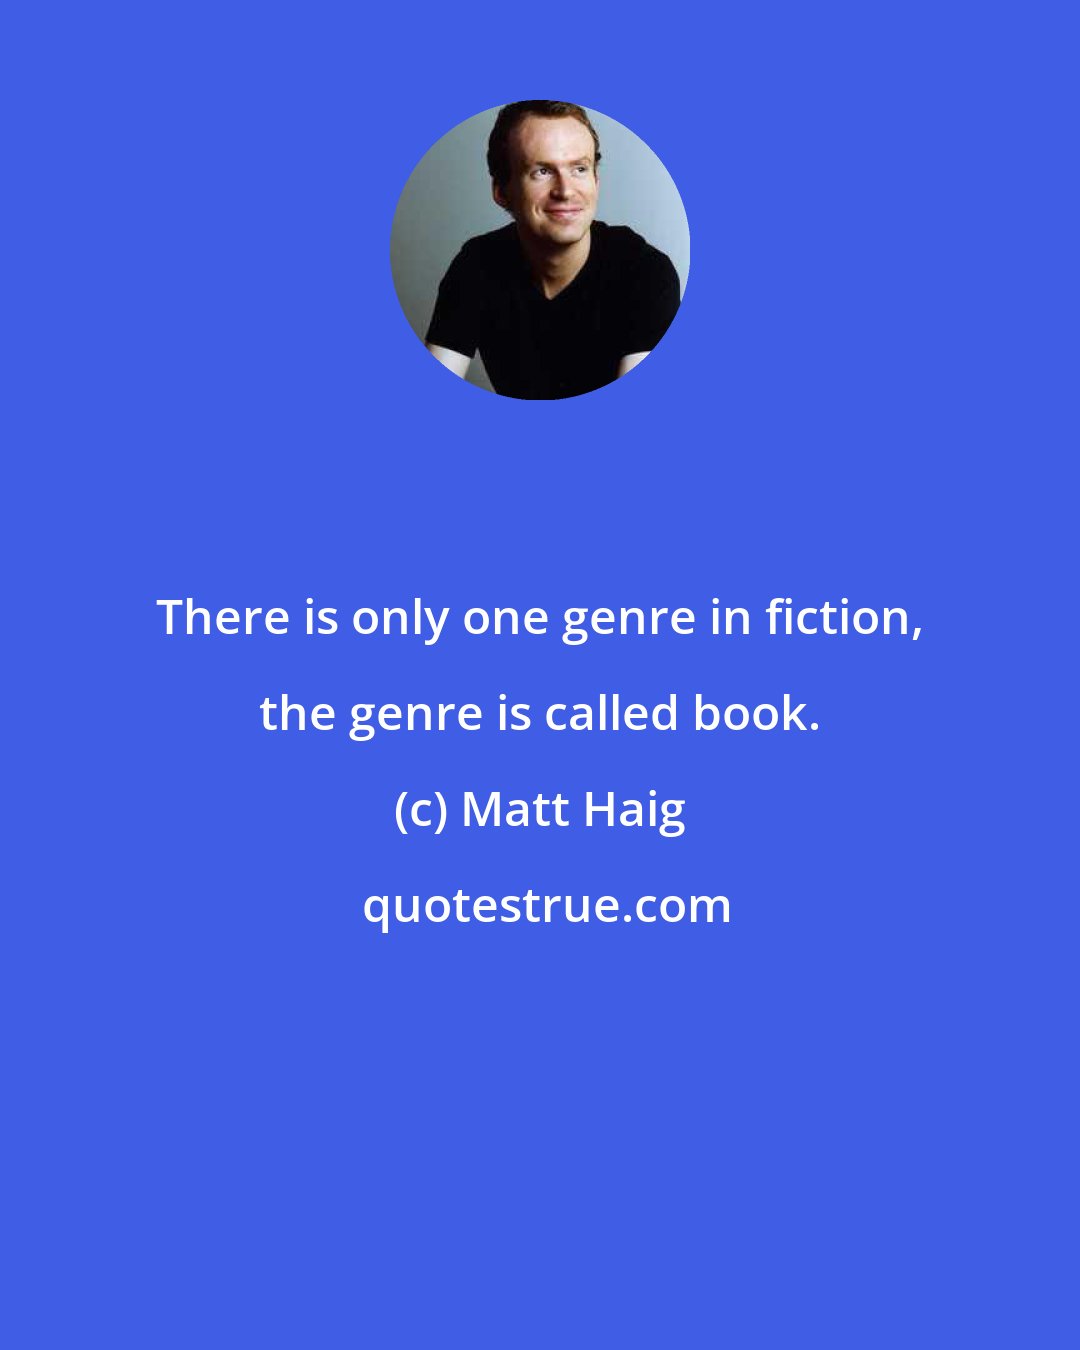 Matt Haig: There is only one genre in fiction, the genre is called book.